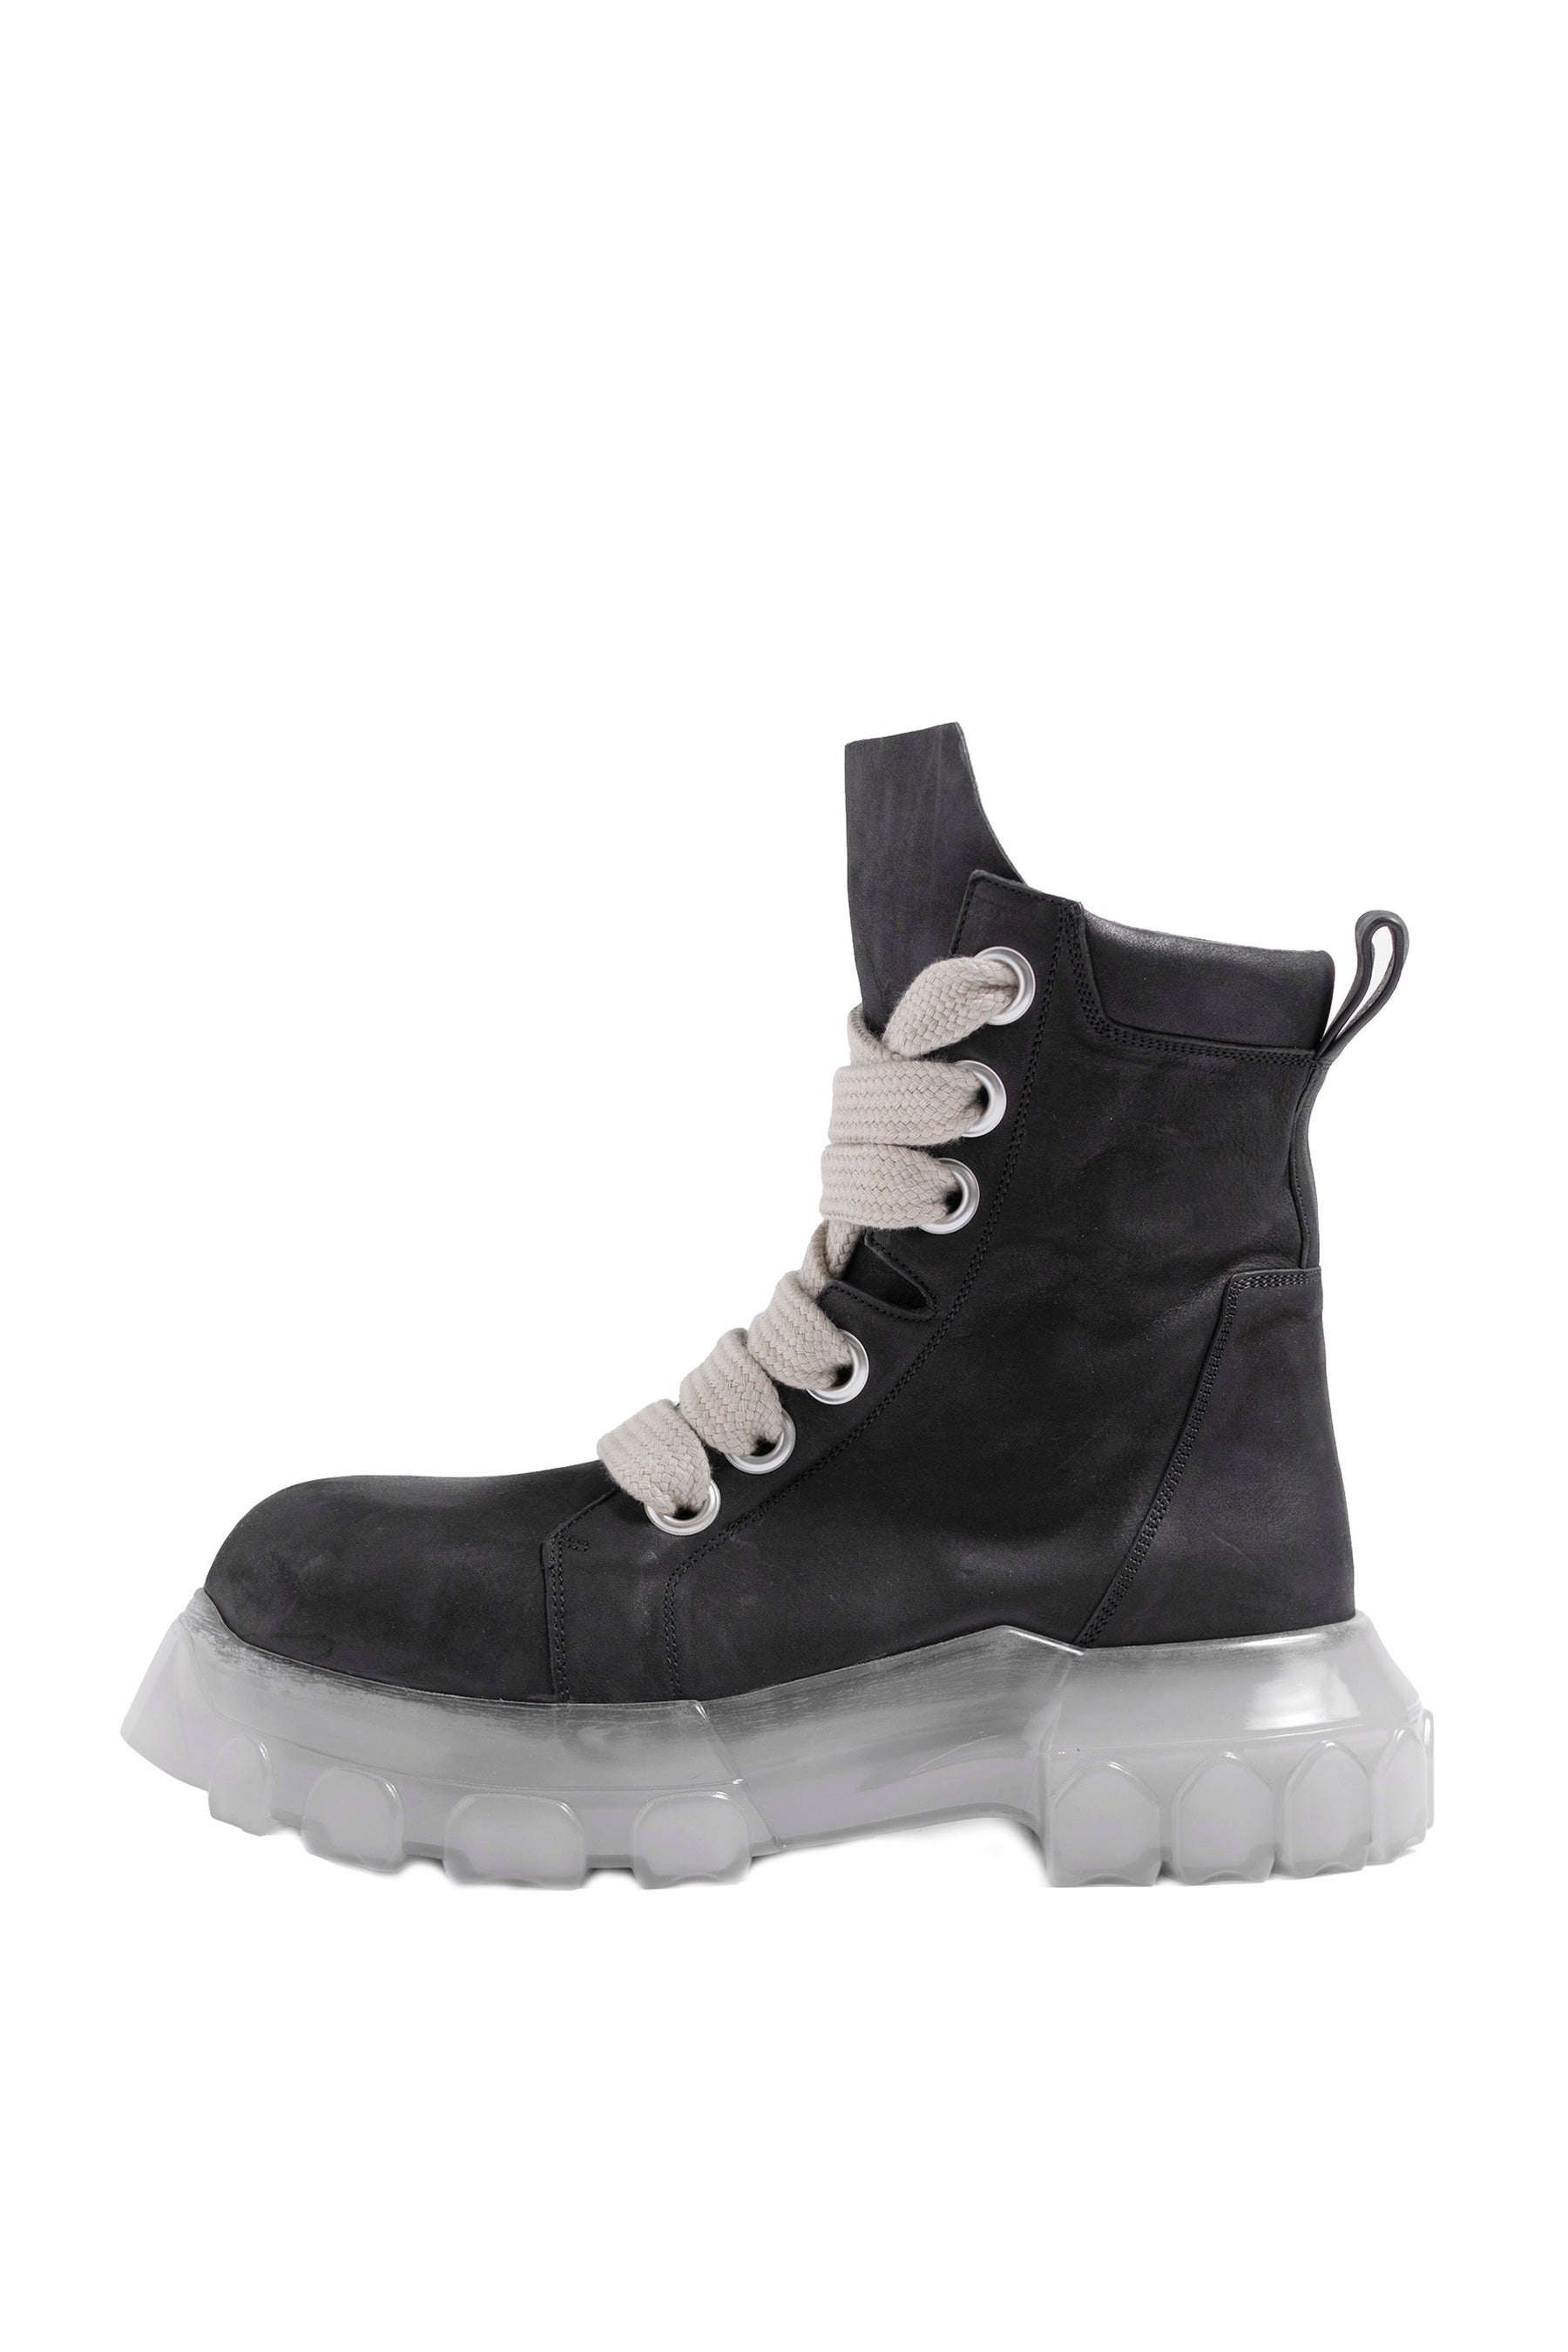 Rick Owens SS23 JUMBOLACED LACEUP BOZO TRACTOR / BLK CLEAR - NUBIAN